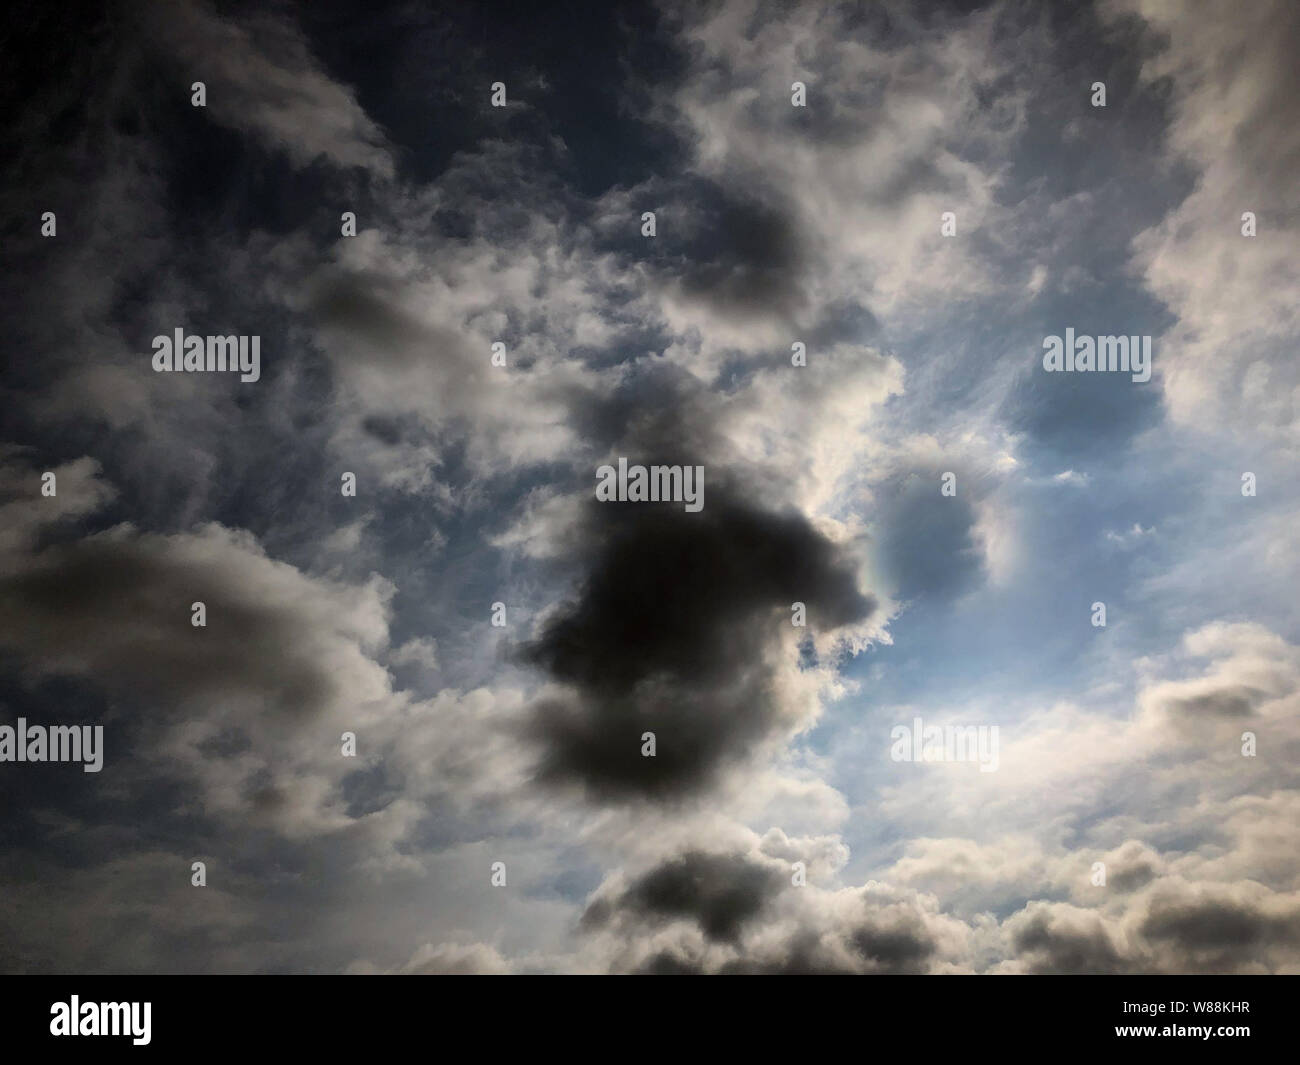 Storm clouds gathering. Stock Photo